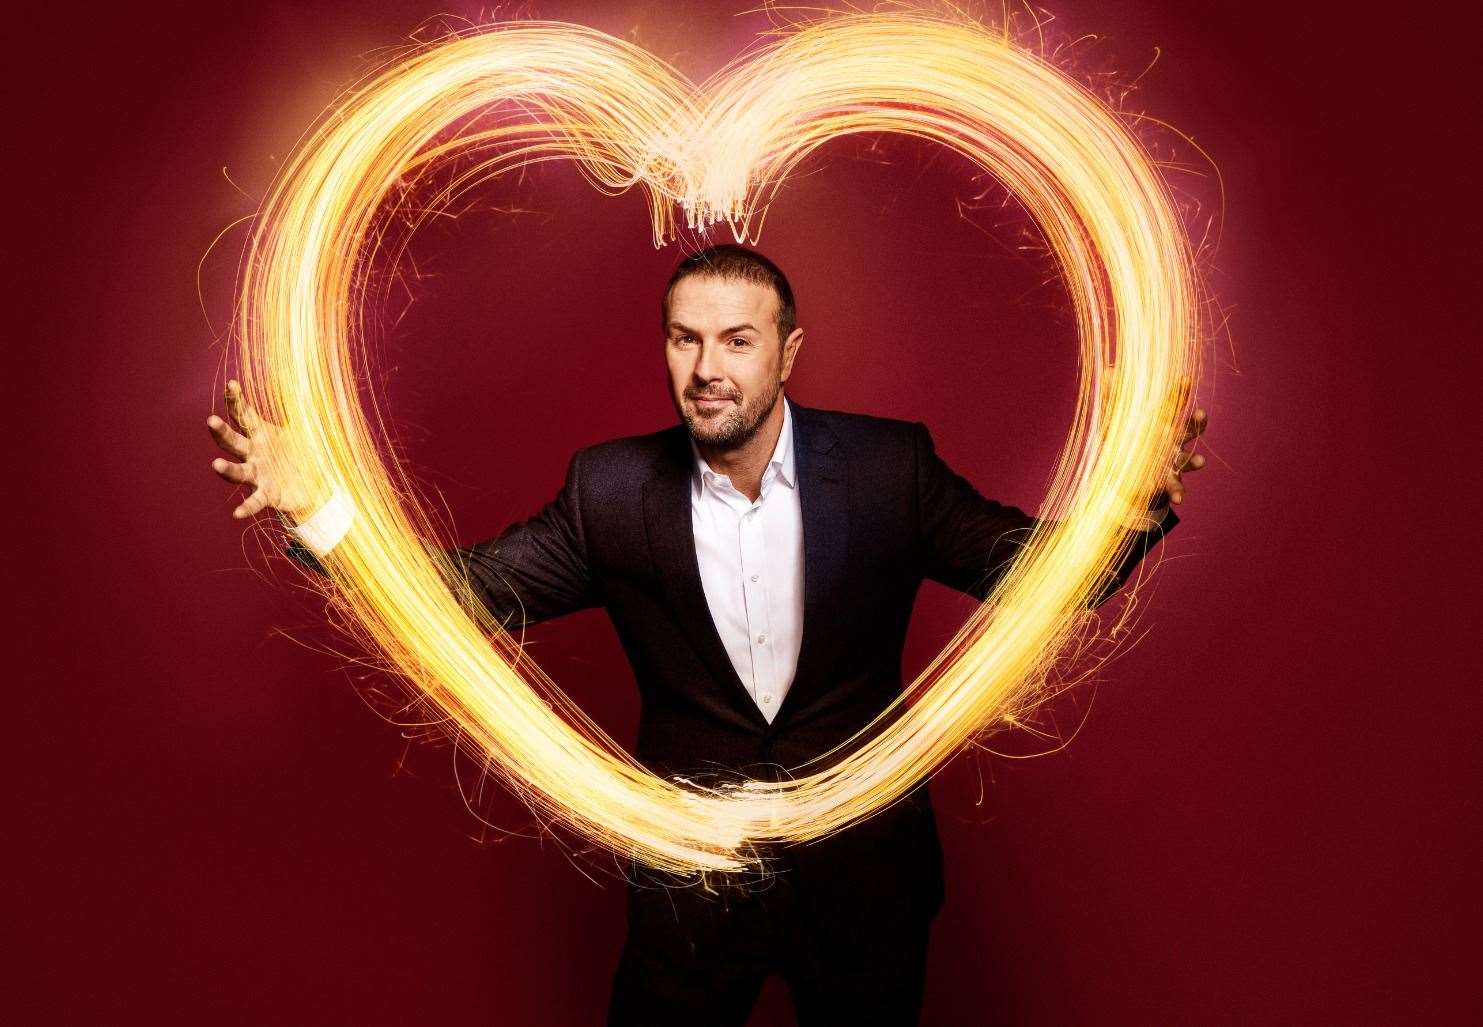 Take Me Out host Paddy McGuinness